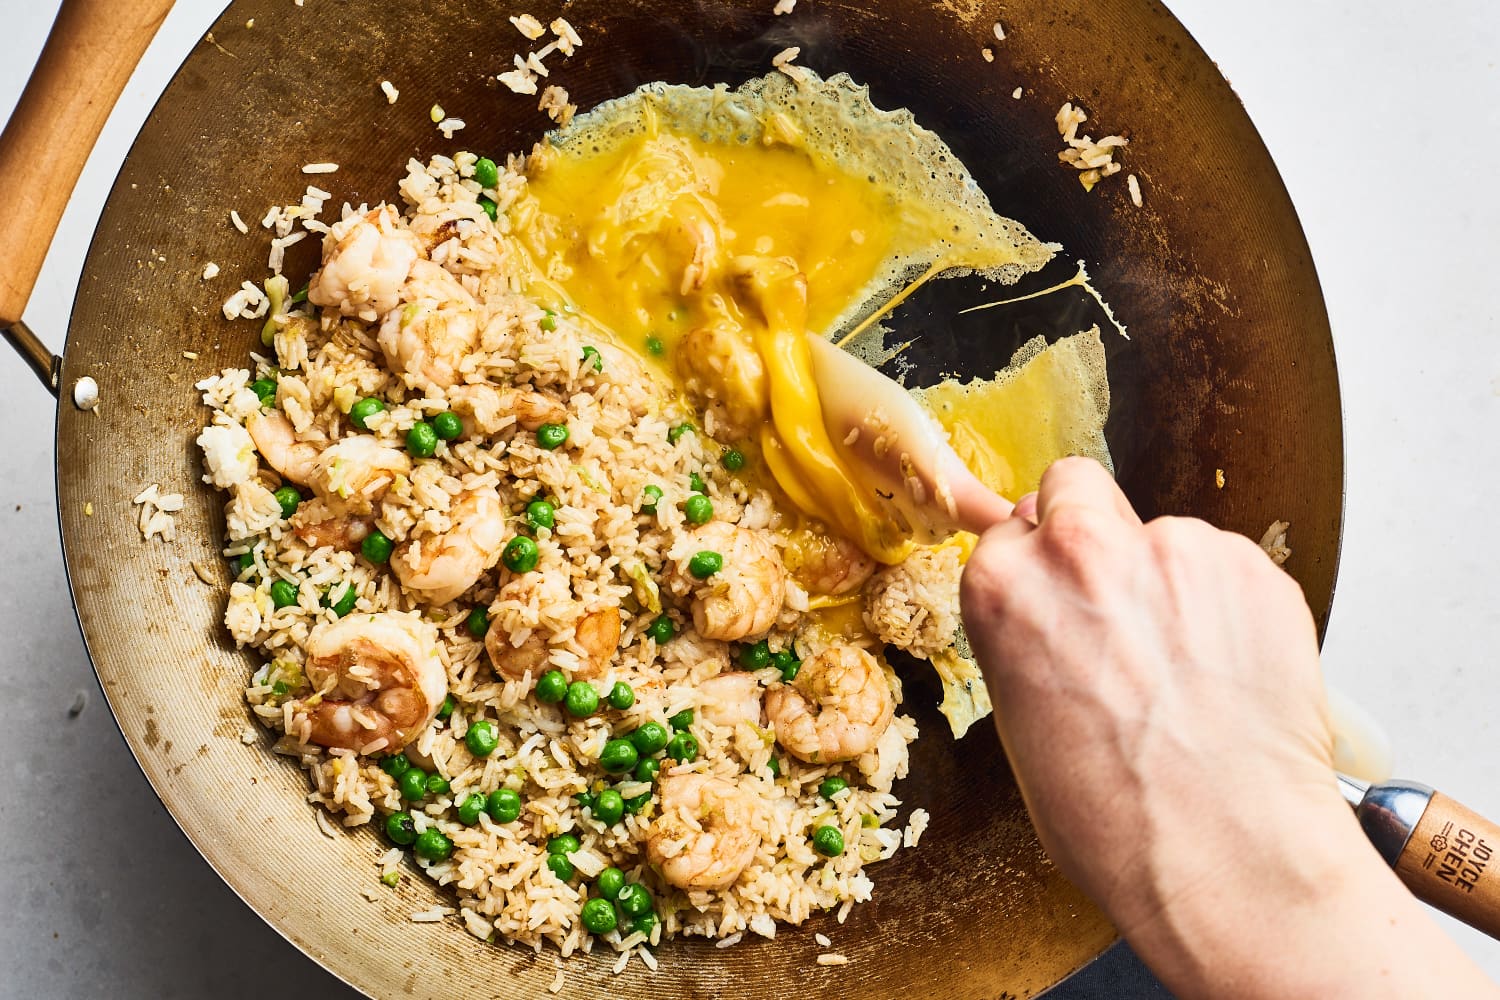 How To Make Easy Shrimp Fried Rice That’s Even Better than Takeout